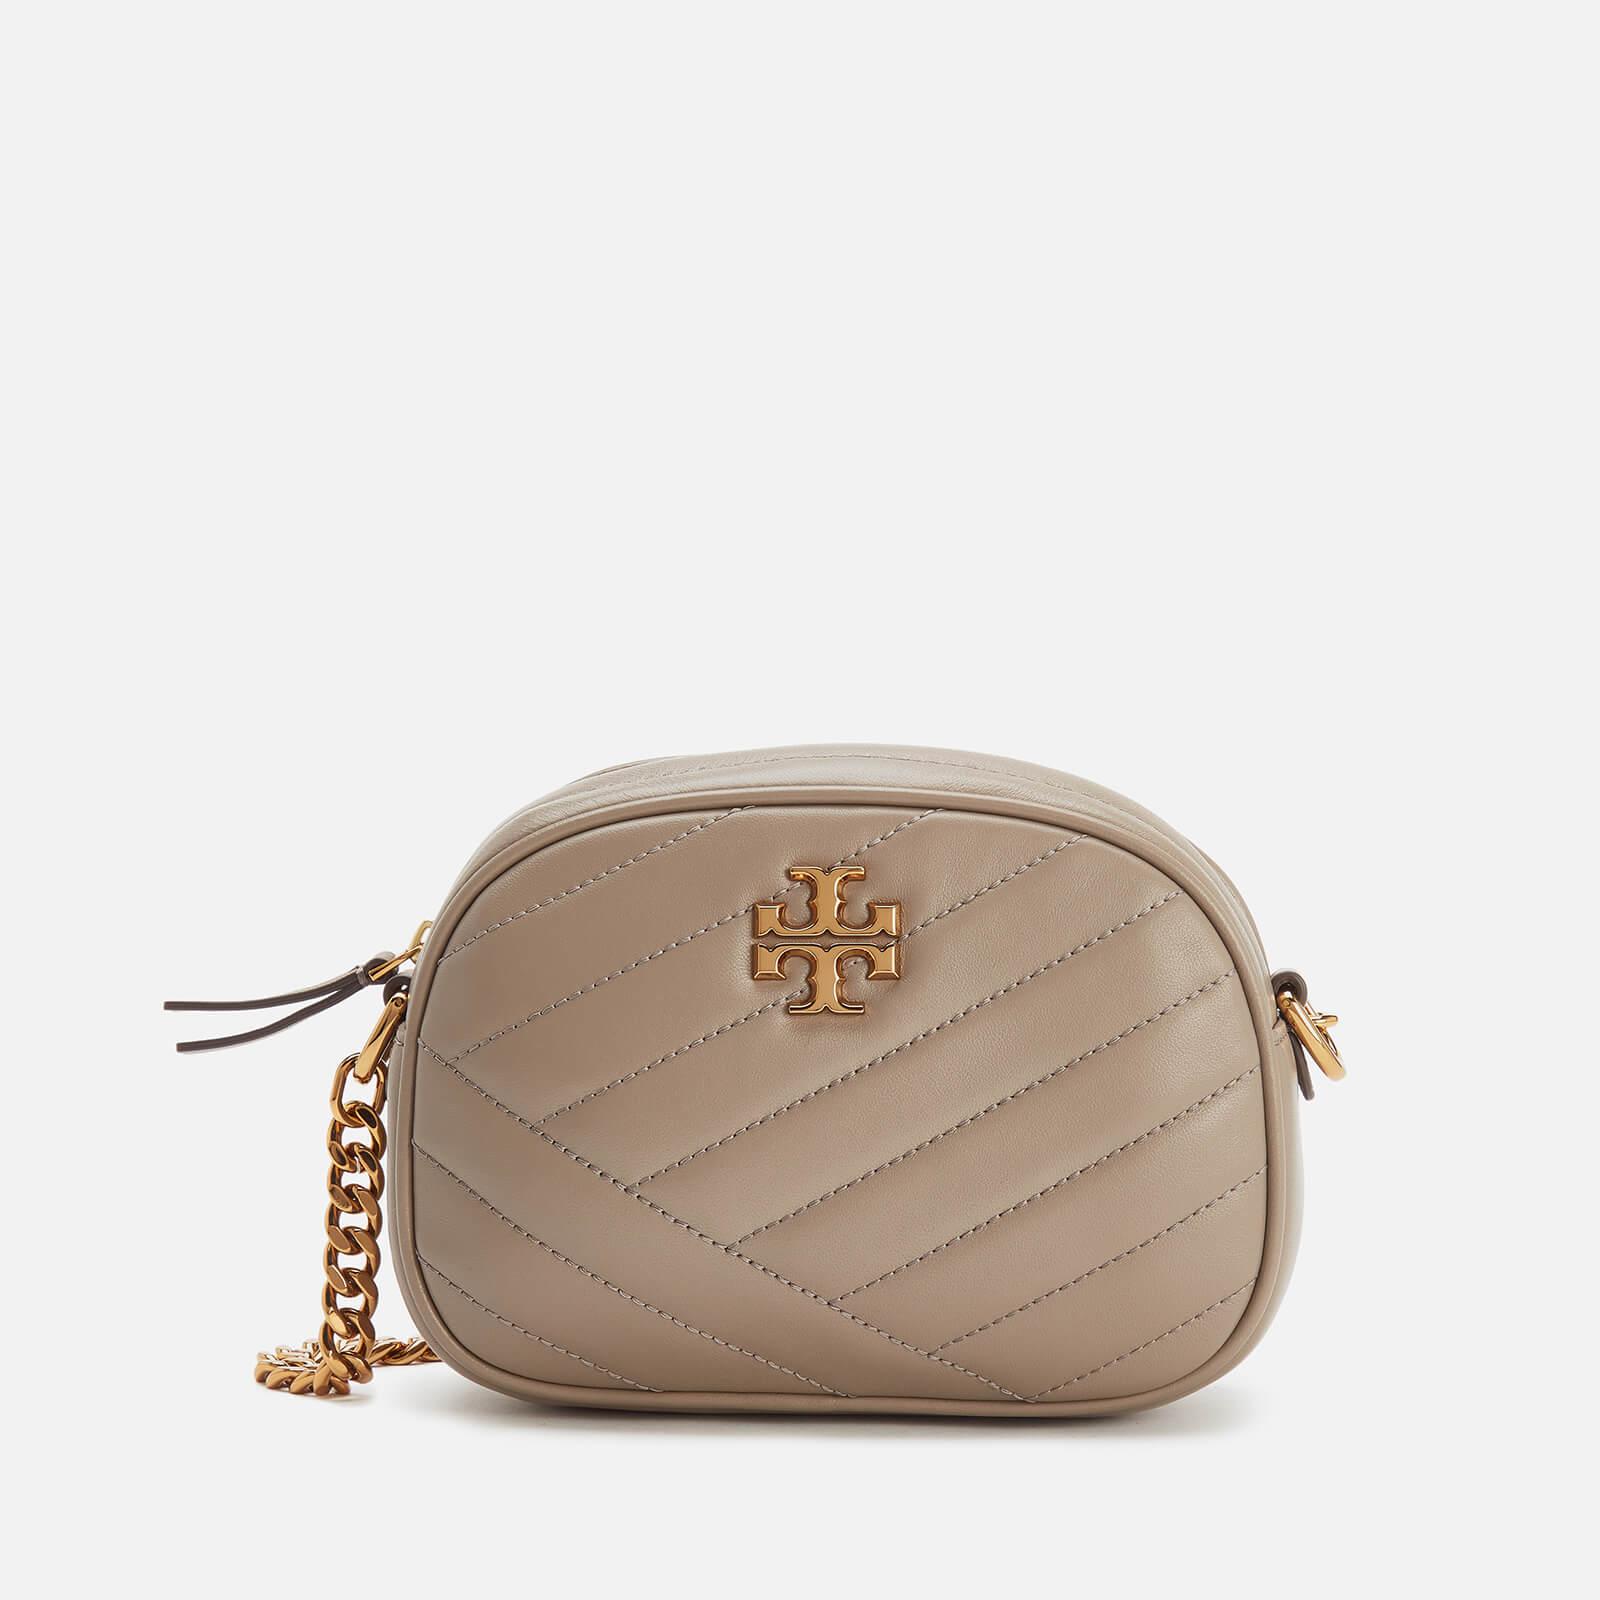 Tory Burch Tory Burch Kira Small Chevron Shoulder Bag In Gray Quilted  Leather Grey: Handbags